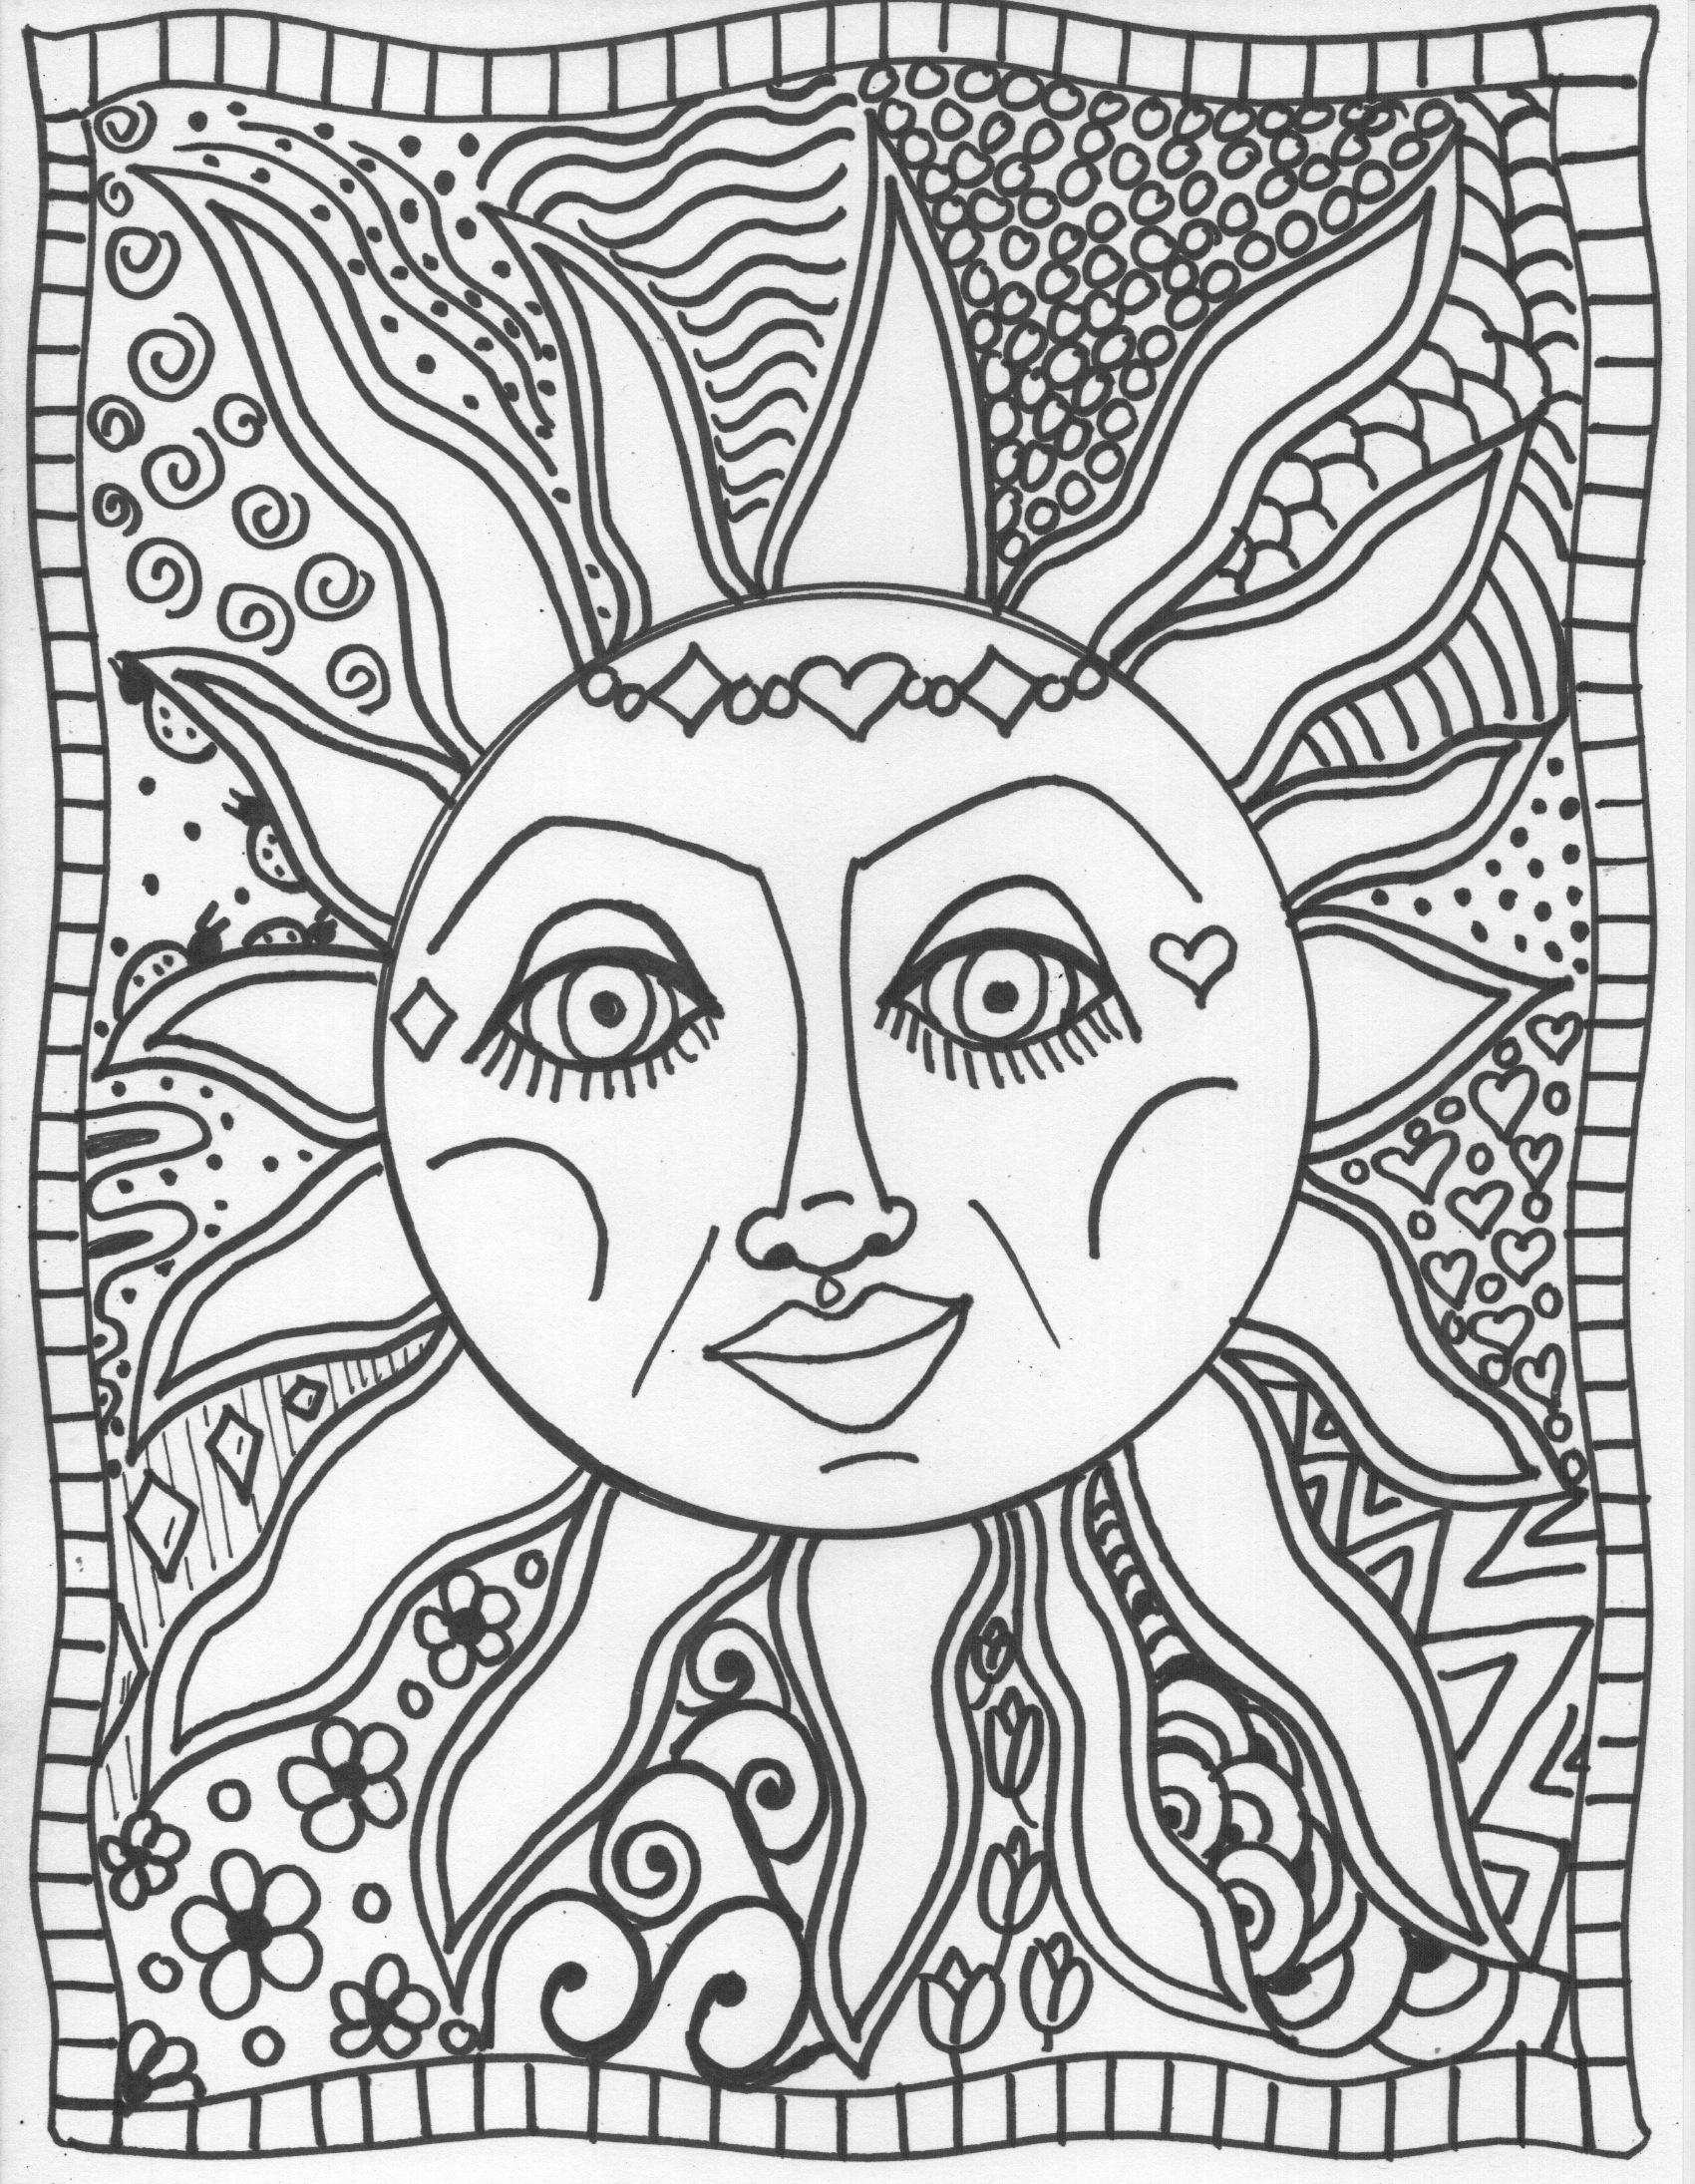 Coloring Pages : Trippy Coloring Pages Sun Coloringstar Adult For - Free Printable Trippy Coloring Pages